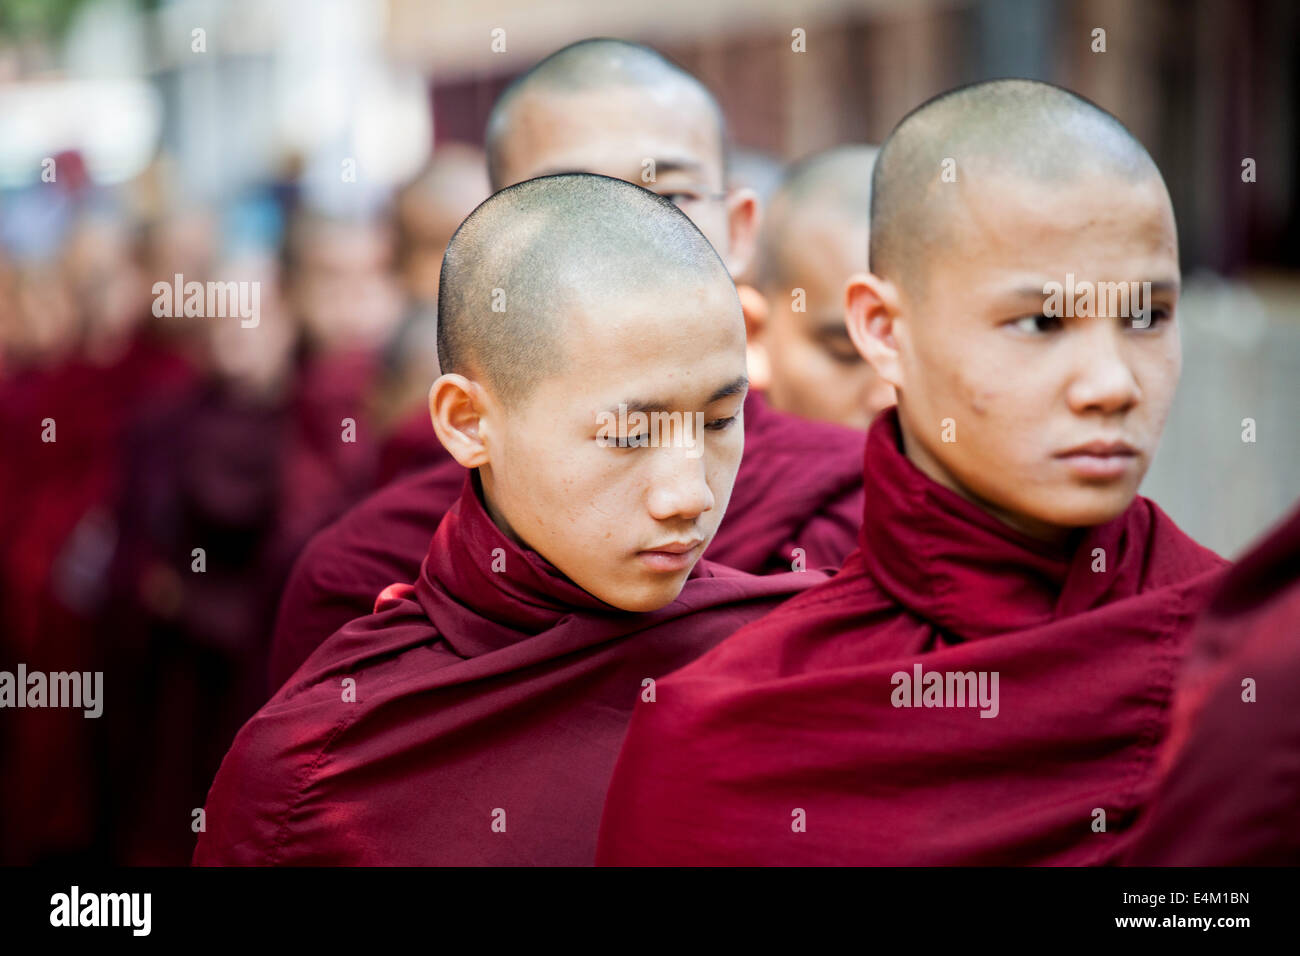 Young Buddhist monks wait in line for food during an Alms Ceremony at the Maha Aung Mye Bonzan Monastery in Mandalay, Myanmar. Stock Photo